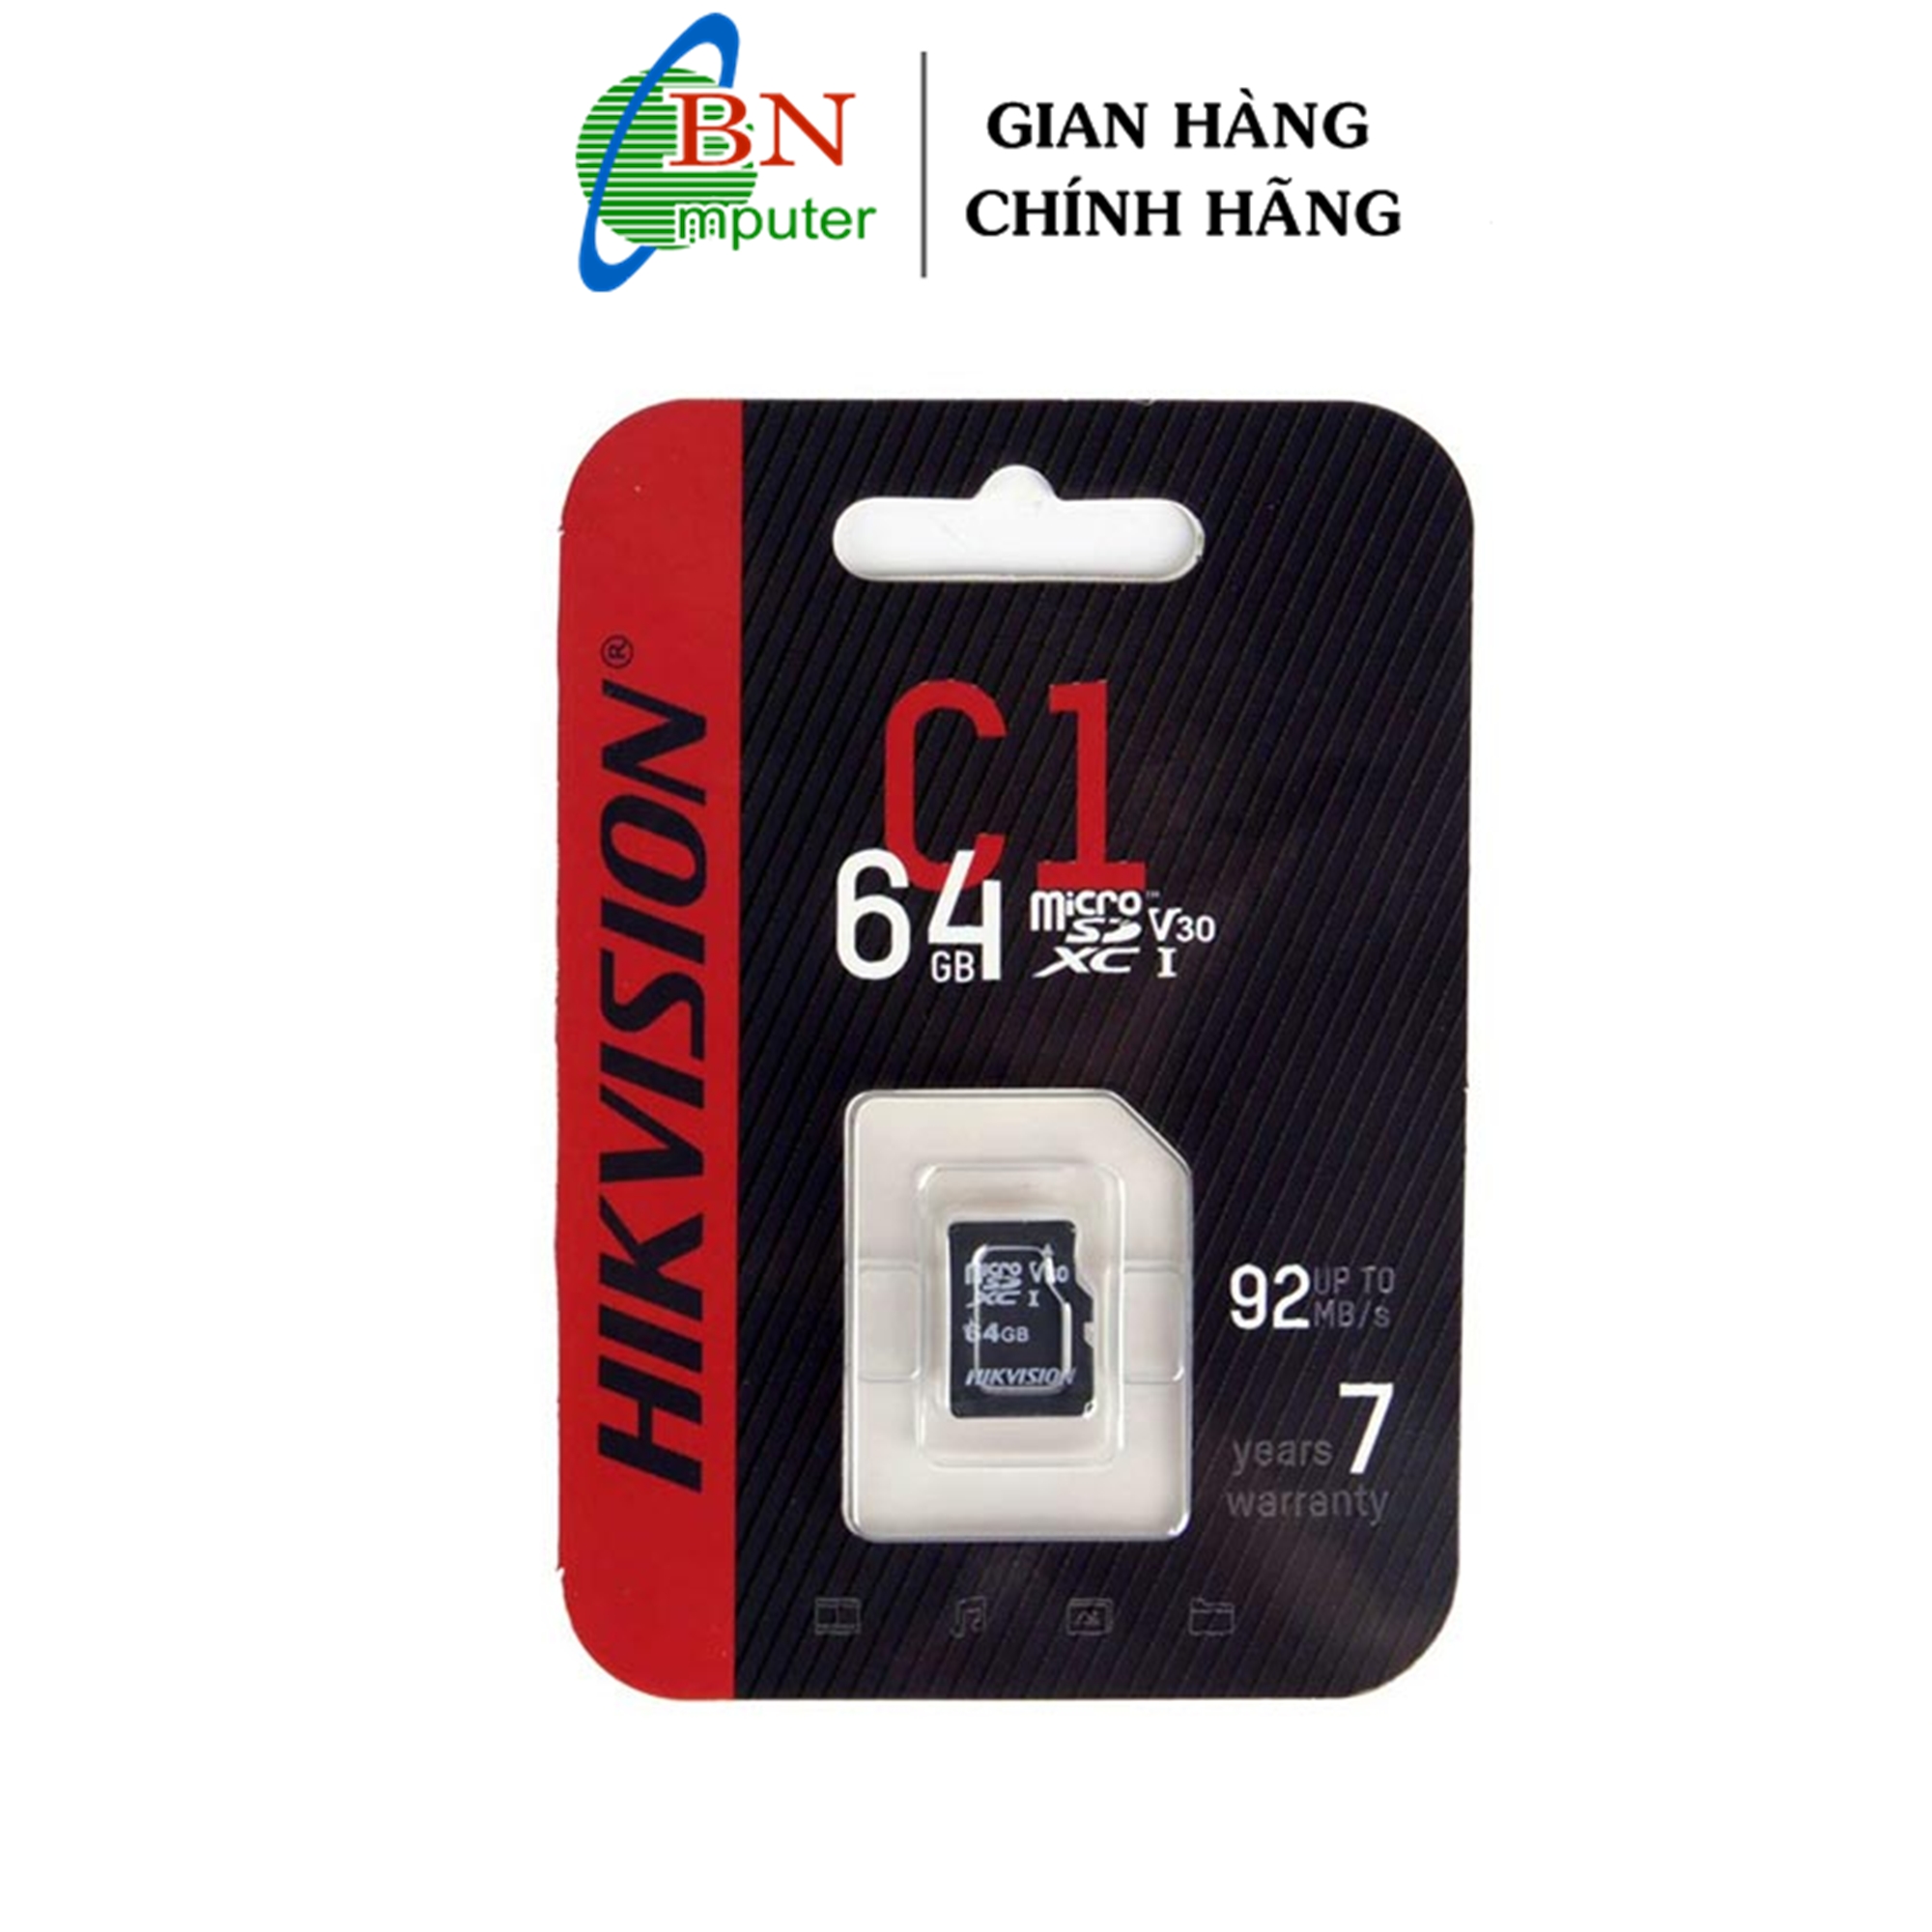 Thẻ nhớ 64G 32G Hikvision MicroSD HS-TF-C1 HF-TF-D1, up to 92mb s